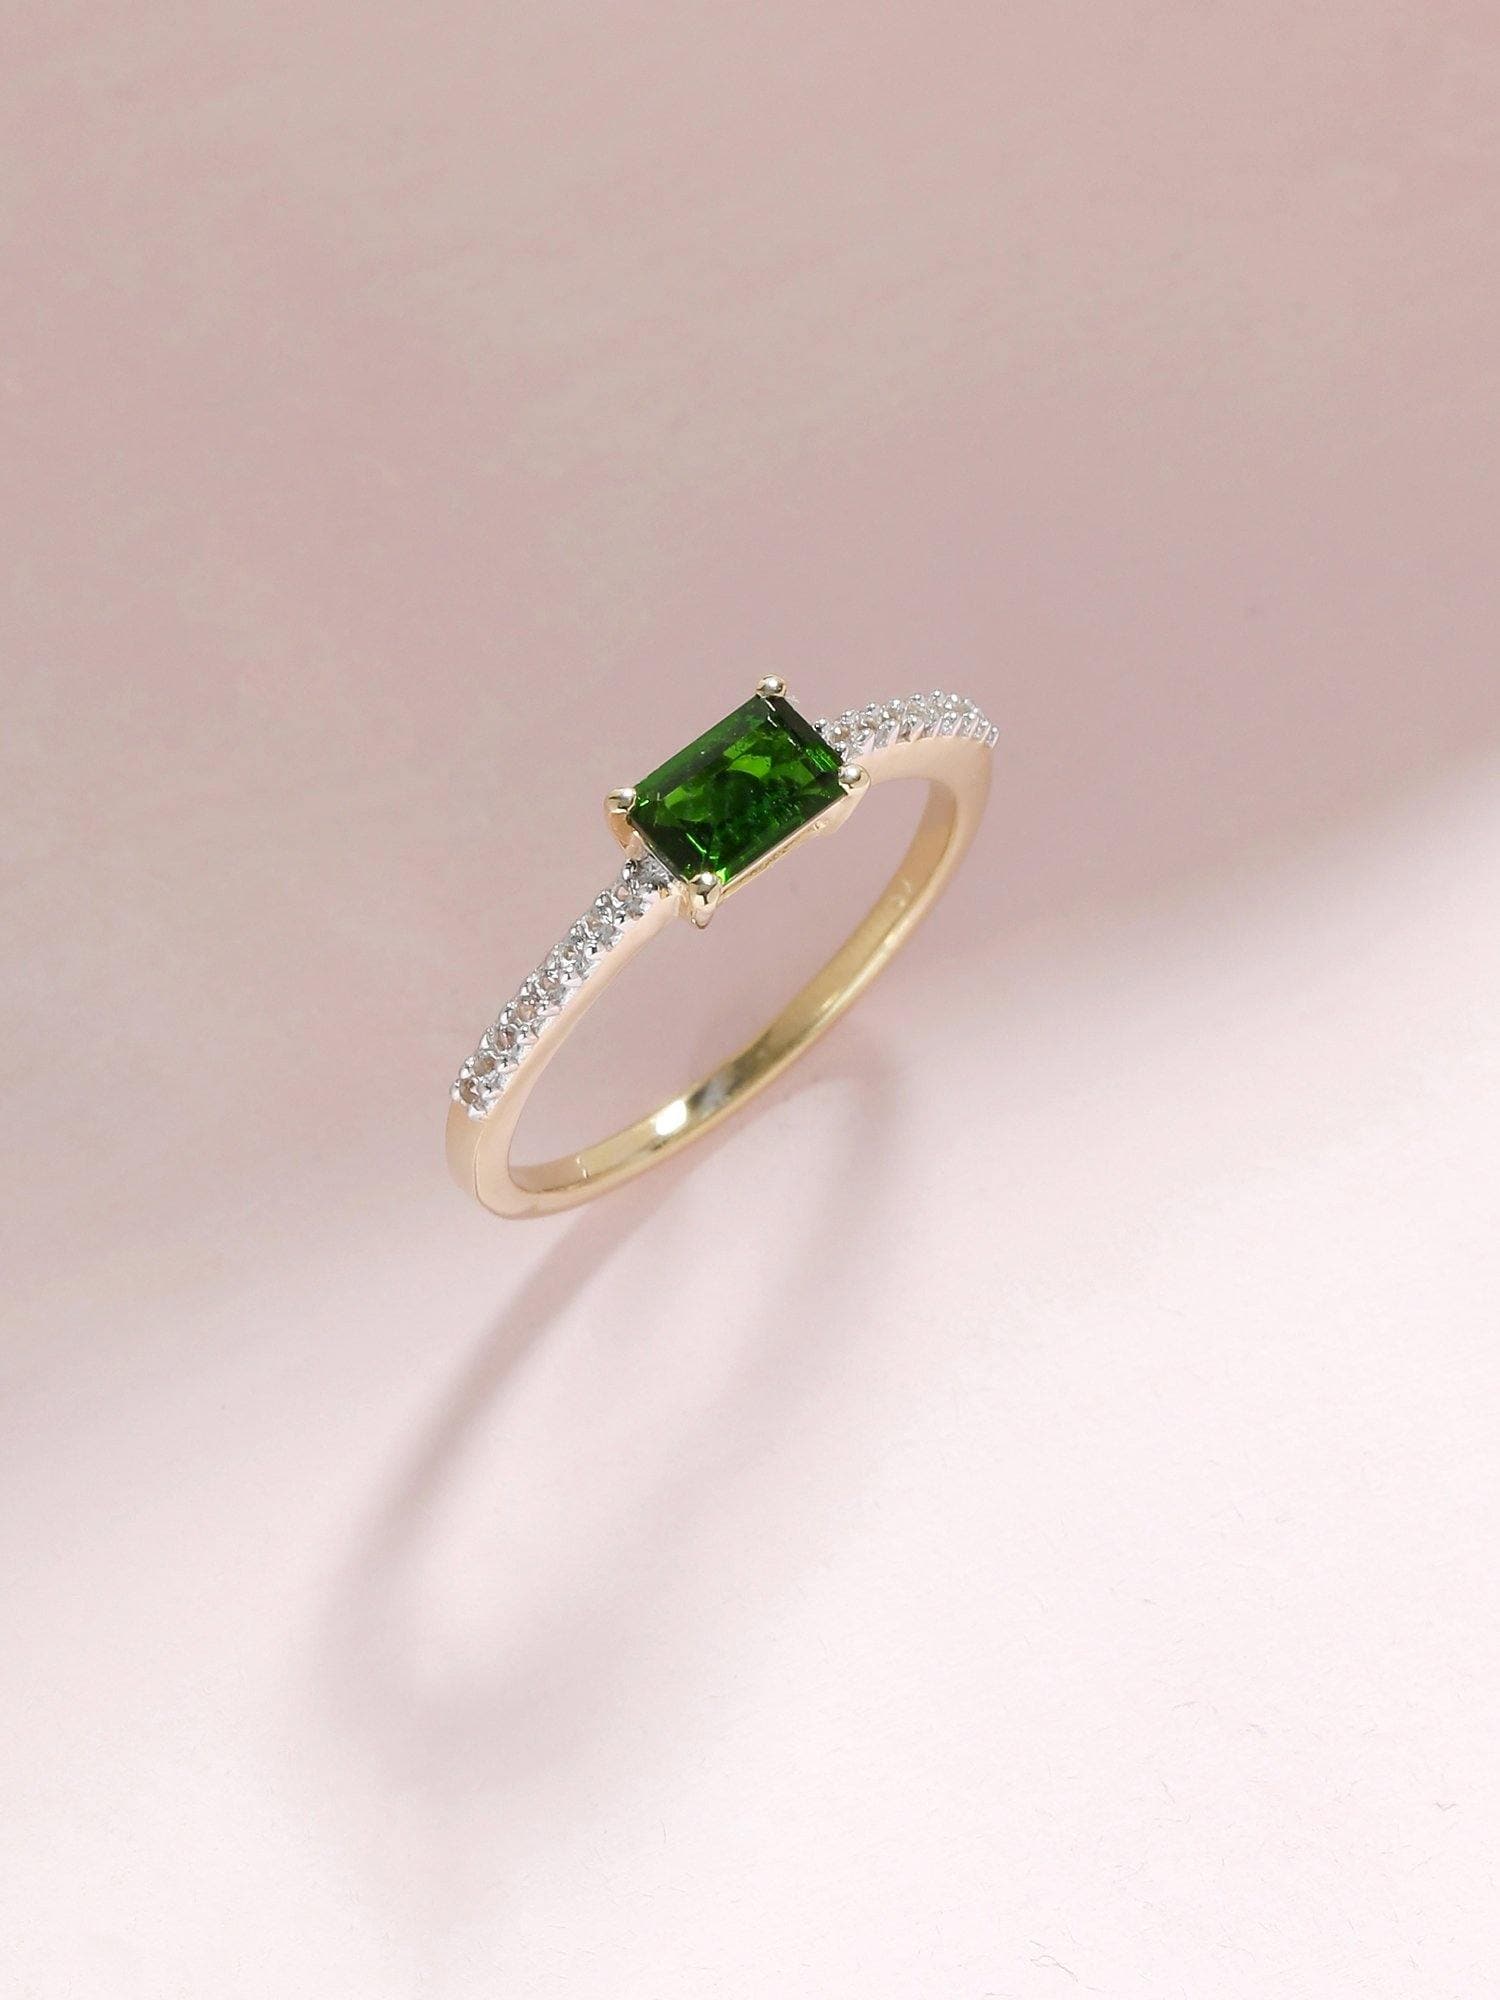 0.68 Ct Chrome Diopside Solid 10k Yellow Gold Ring Jewelry - YoTreasure